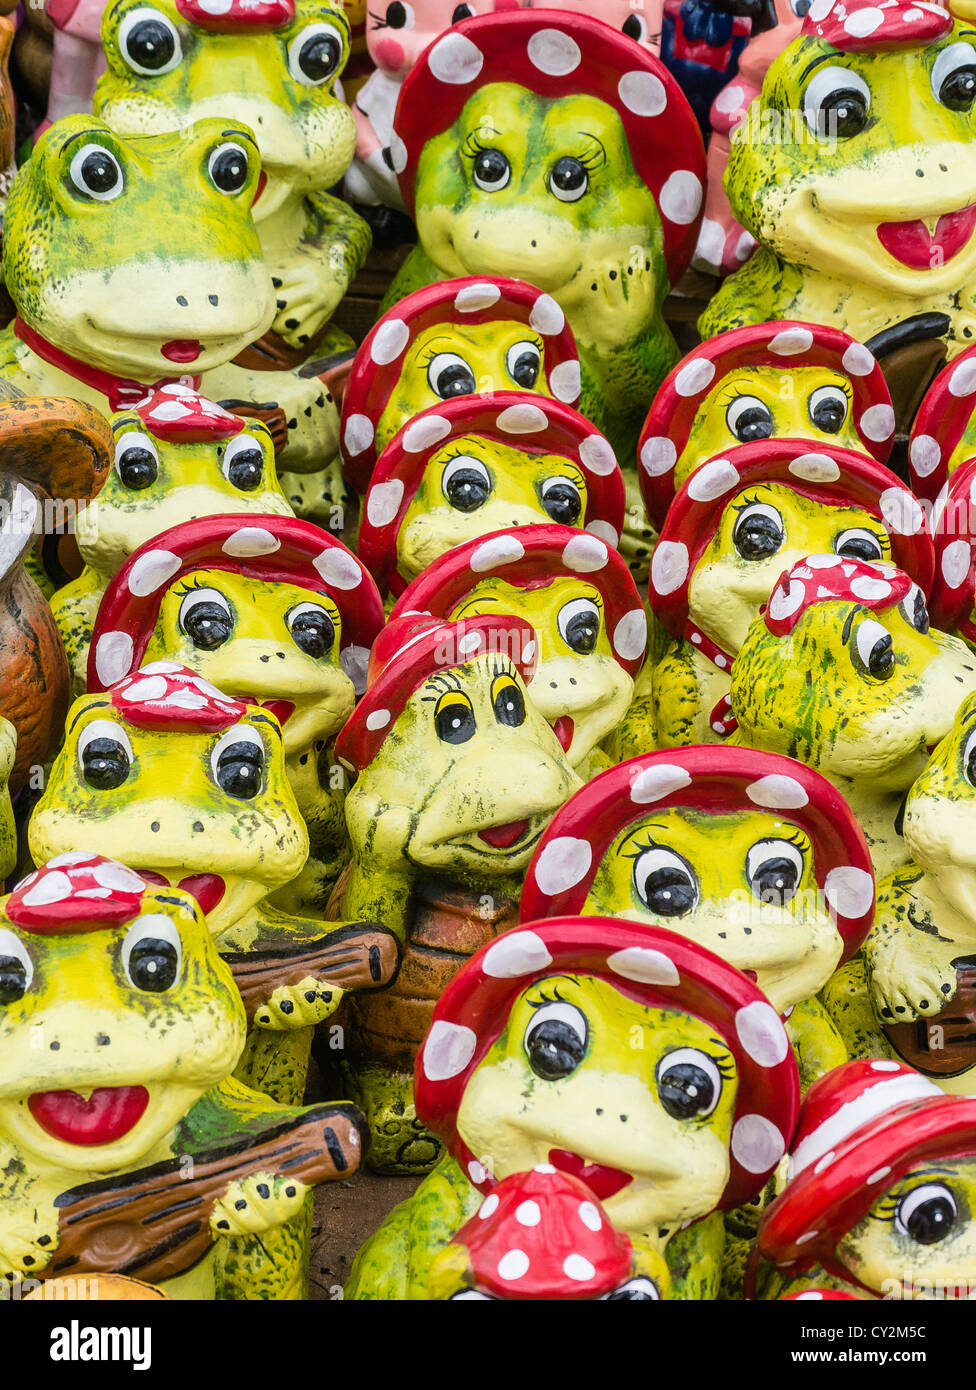 Kitsch lawn art for sale in the form of yellow-green frogs wearing red bonnets at a street market in Asunción Paraguay. Stock Photo